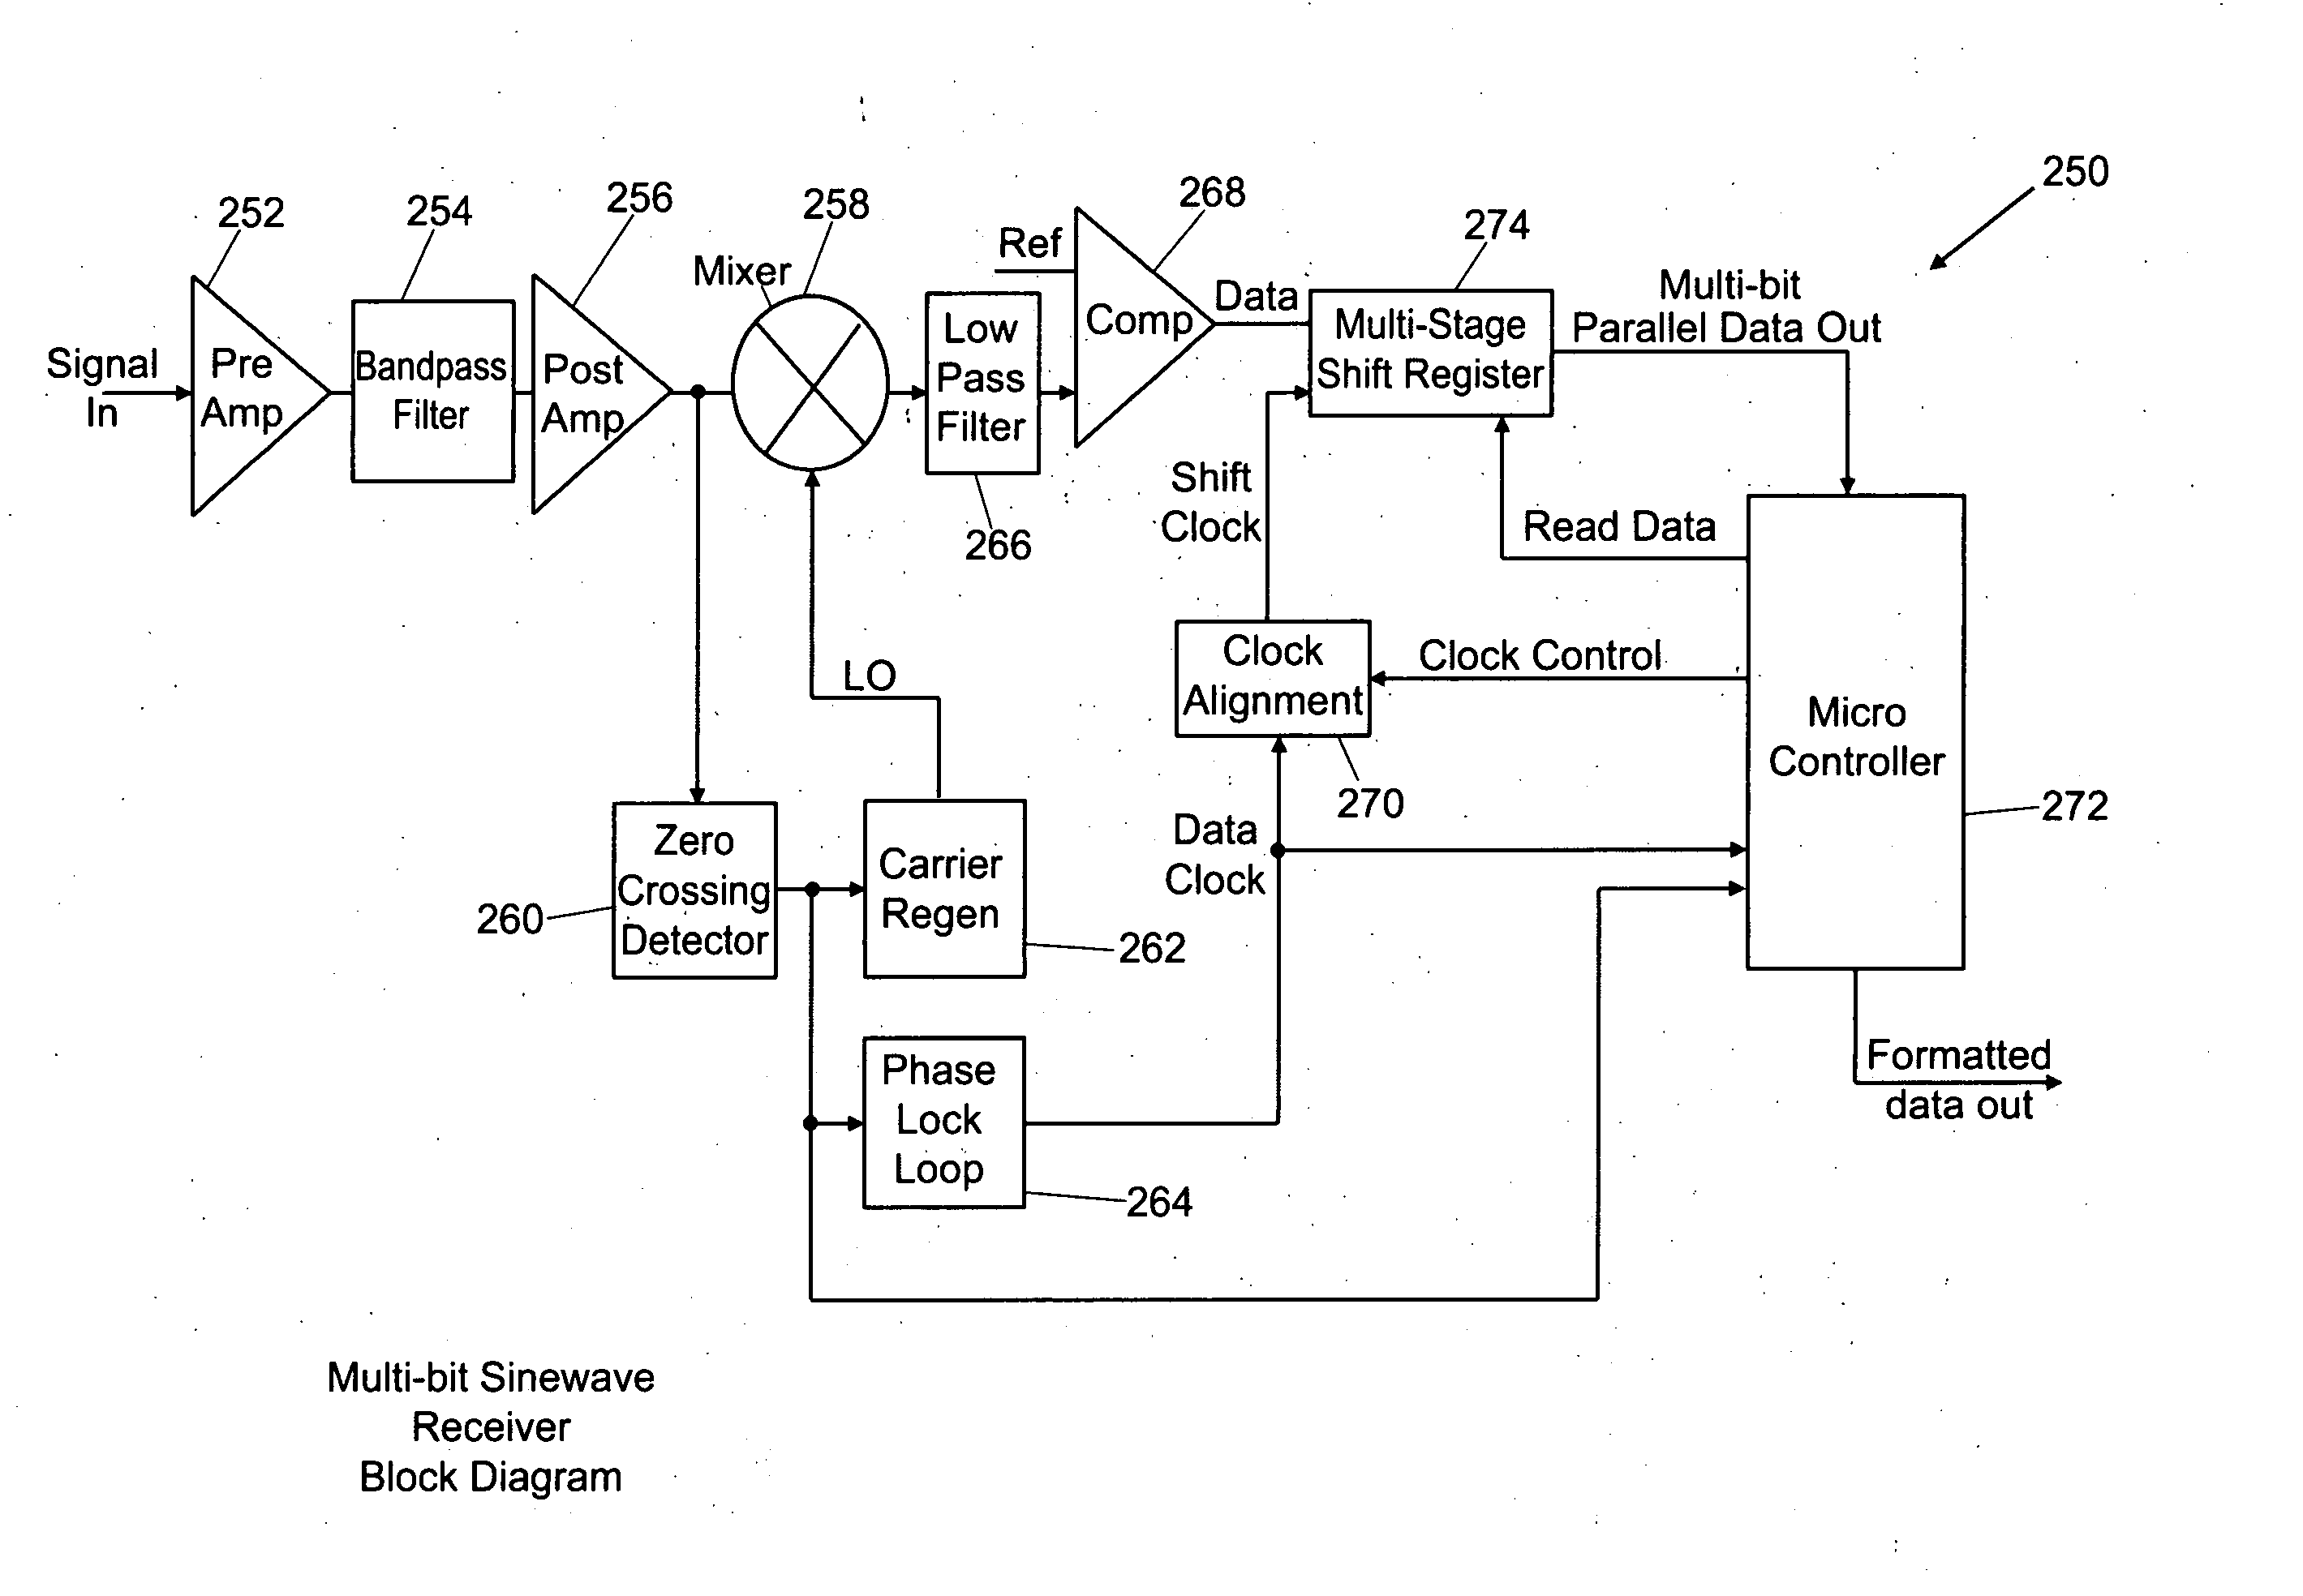 Single and multiple sinewave modulation and demodulation techniques employing carrier-zero and carrier-peak data-word start and stop